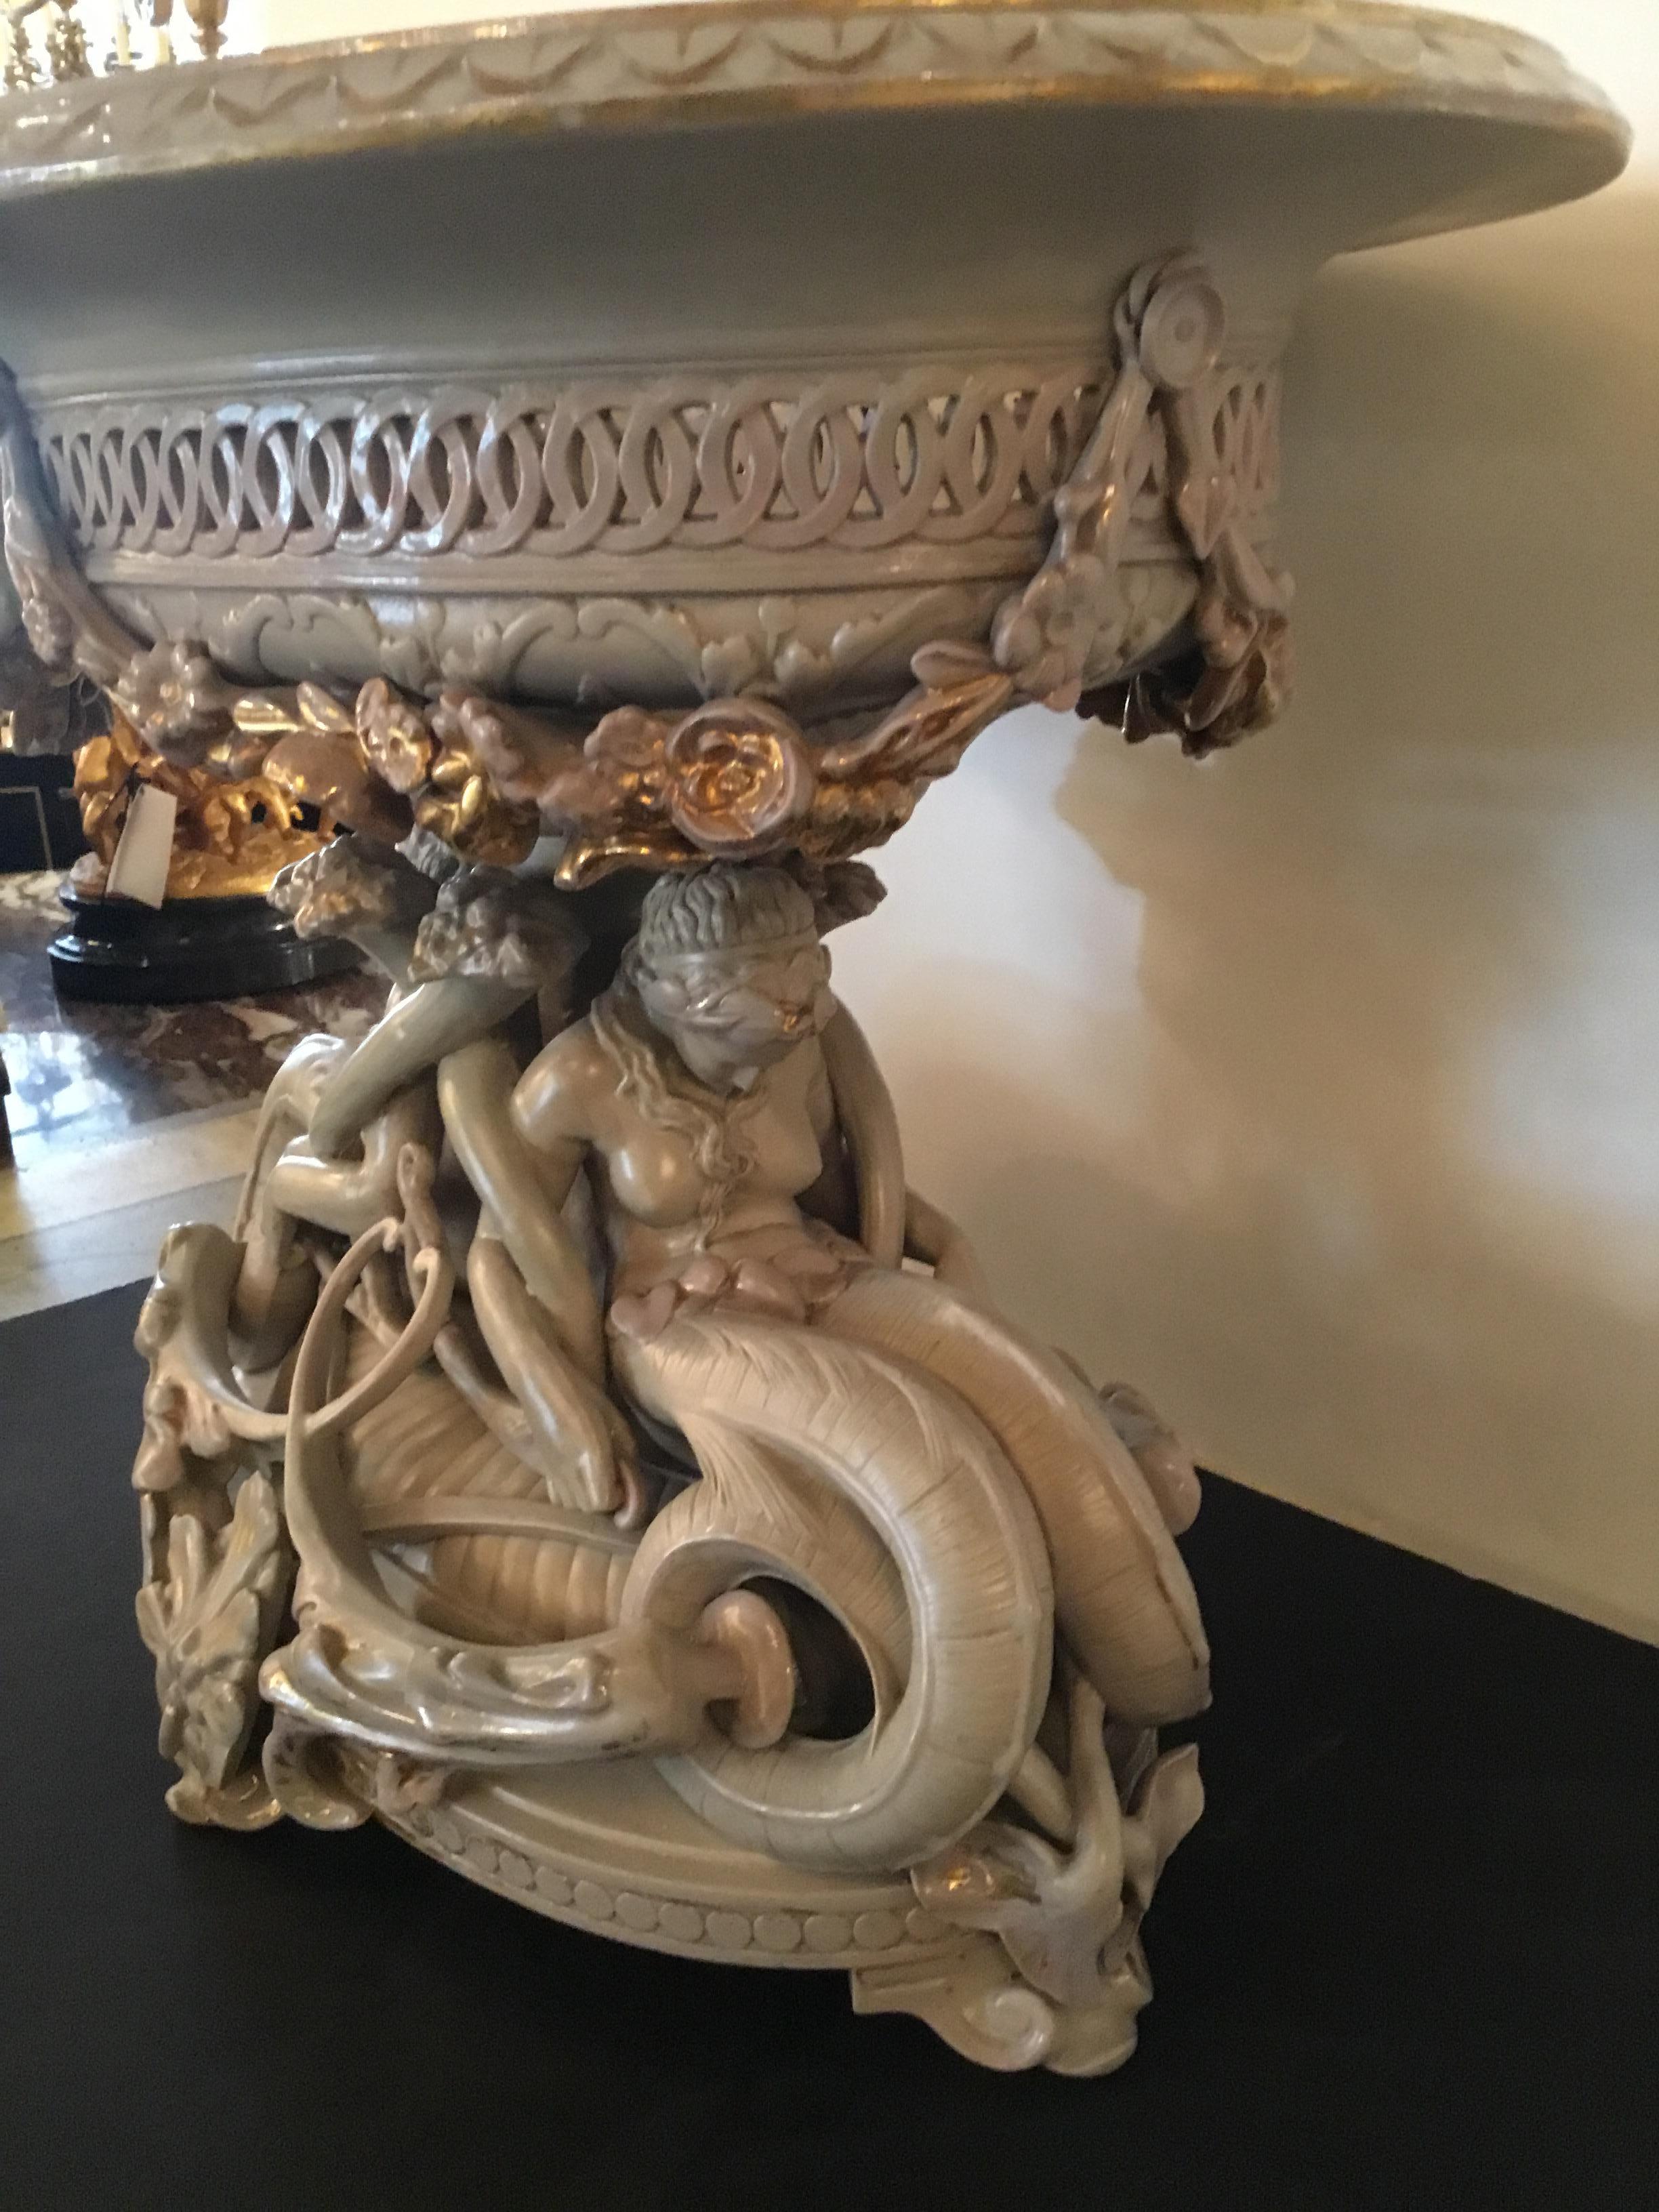 Large and impressive parcel gilt compote having a draped rim
And pierced border decorated with rose garland swags.
The base uniquely styled with serpent maidens, cornucopia,
And stylized leaf sprays.